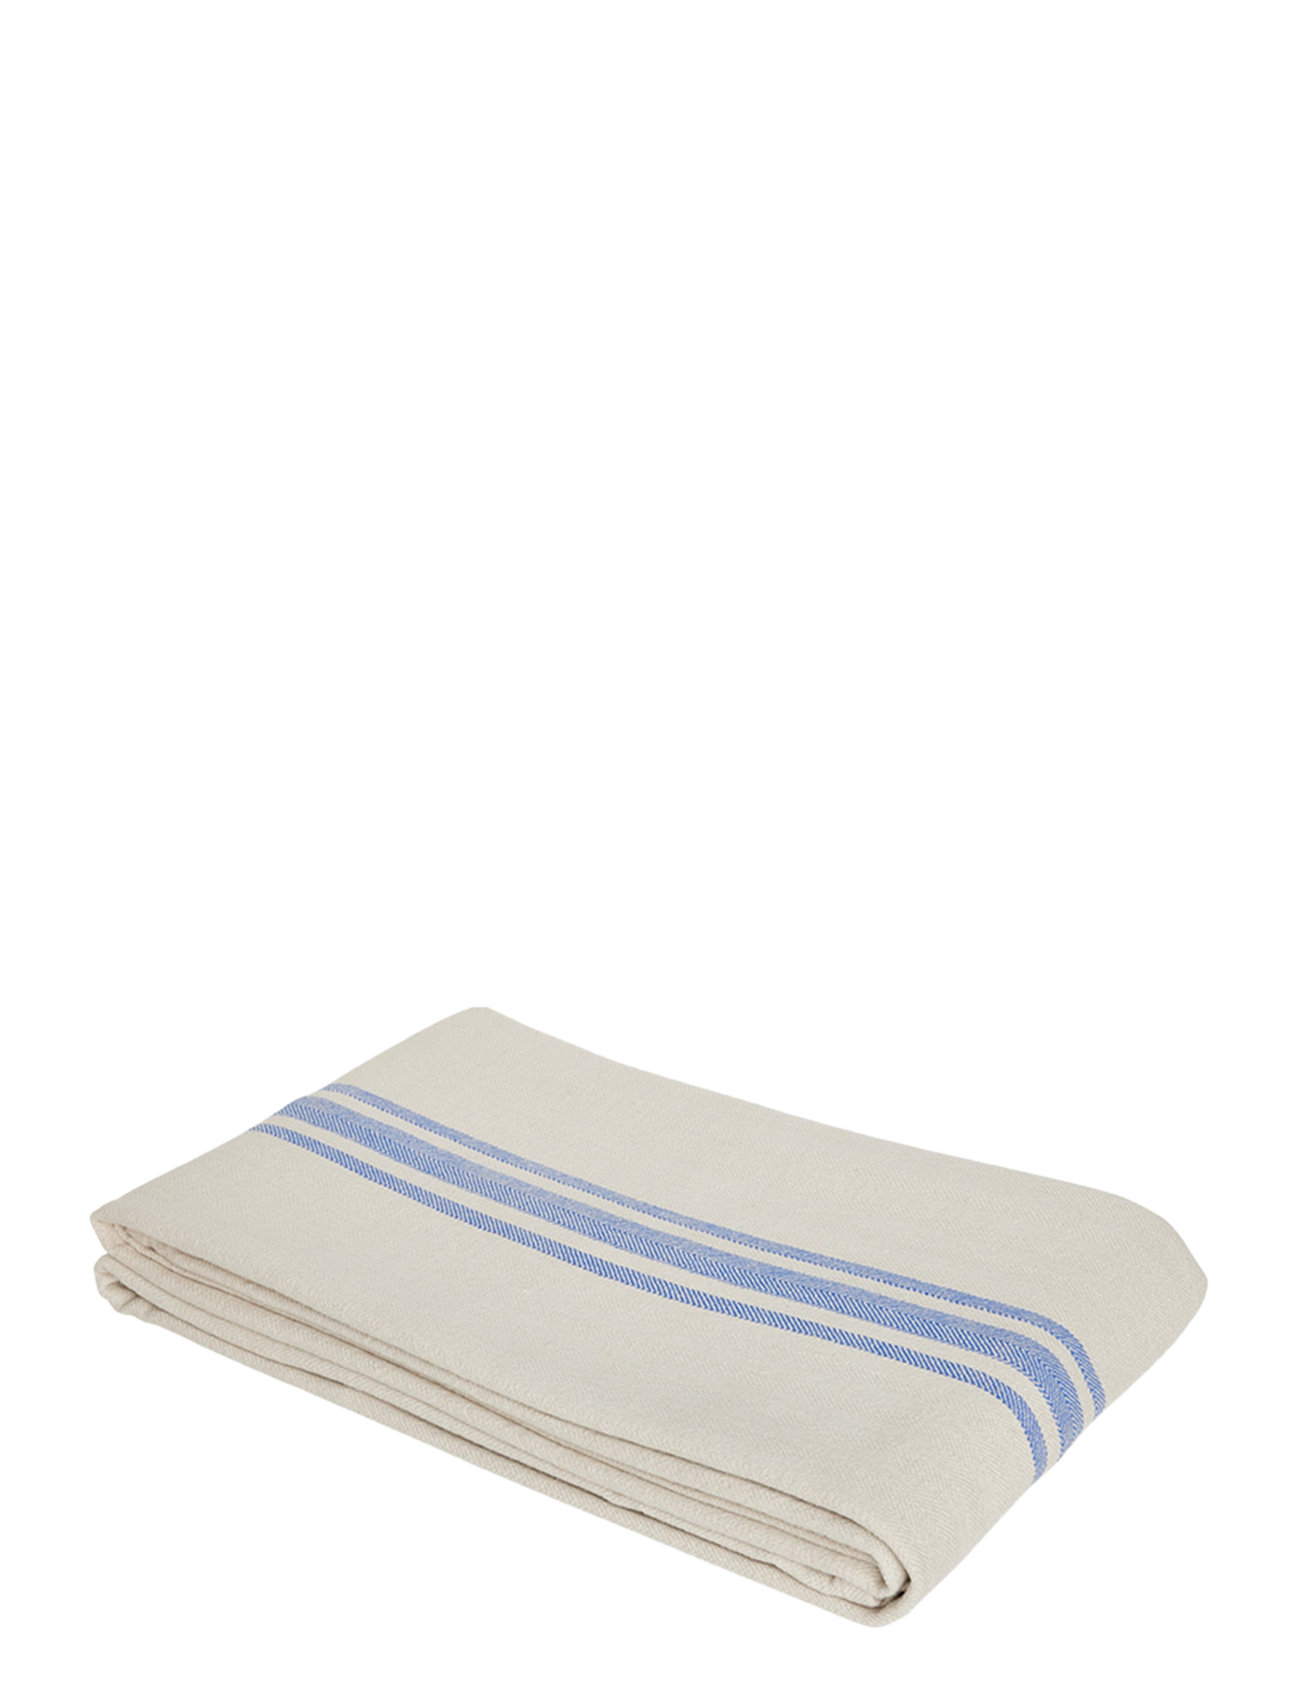 Linu Tablecloth - 200X140 Cm Home Textiles Kitchen Textiles Tablecloths & Table Runners Blue OYOY Living Design